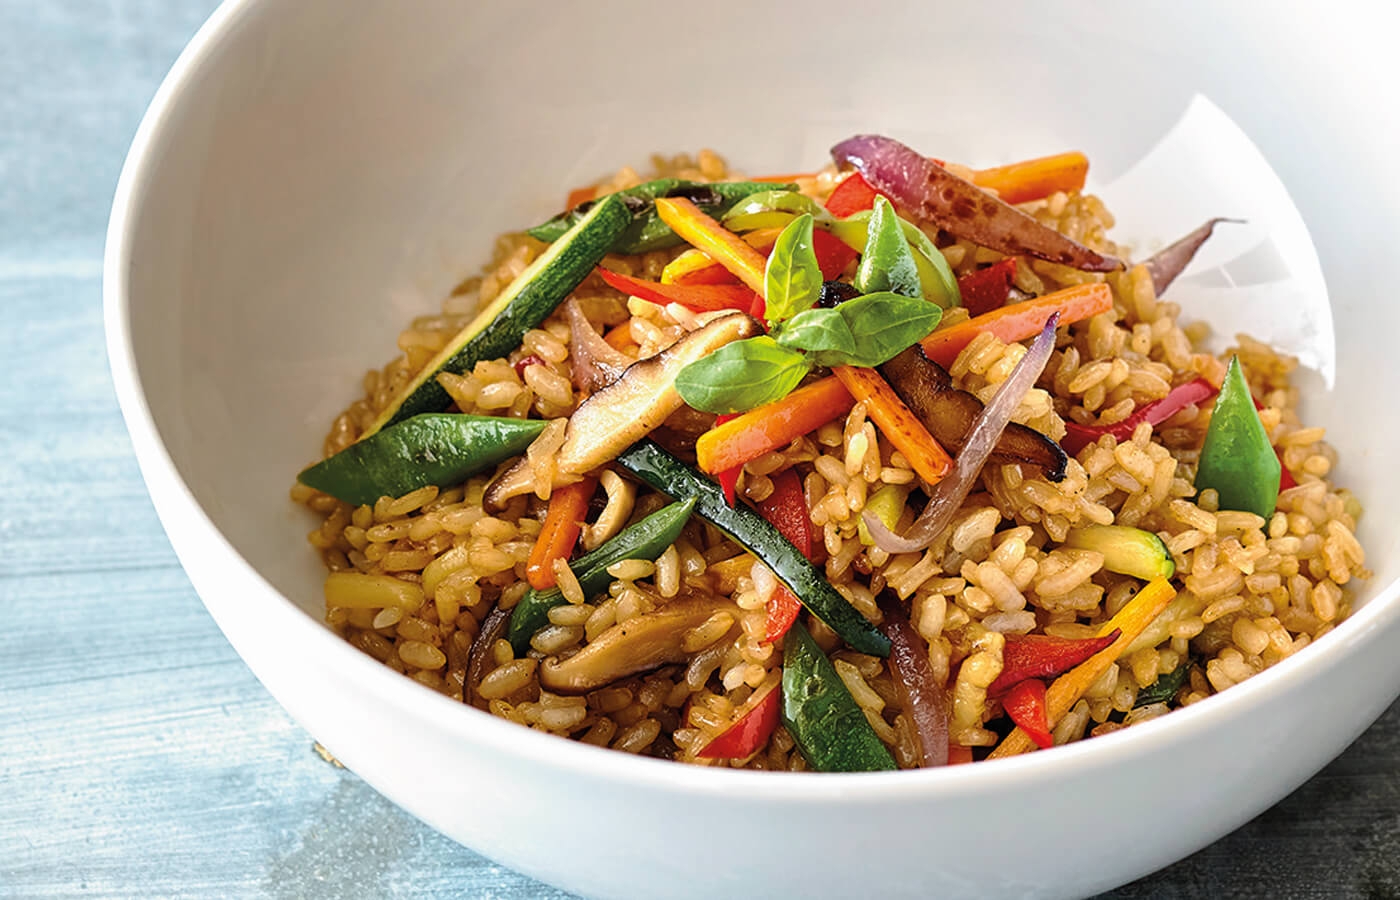 Rice wok with vegetables and chicken